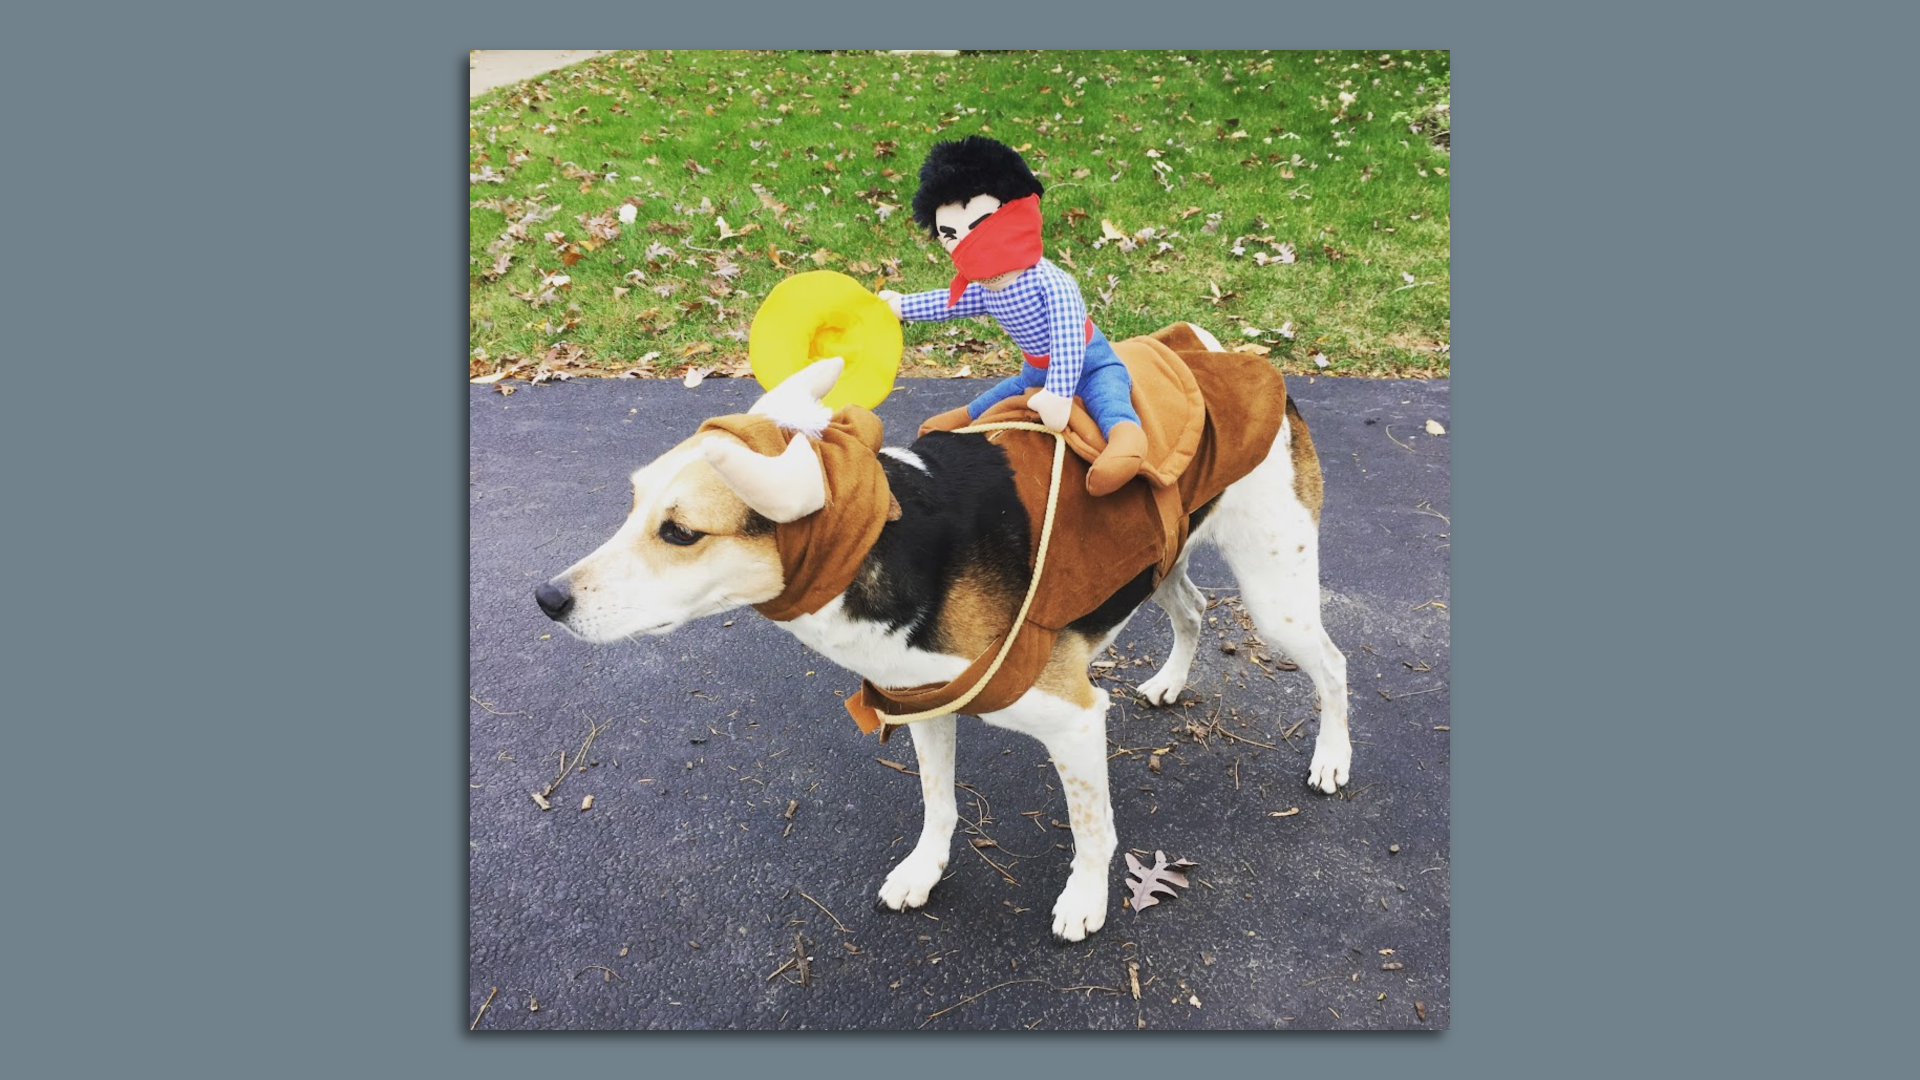 Dog with toy rider